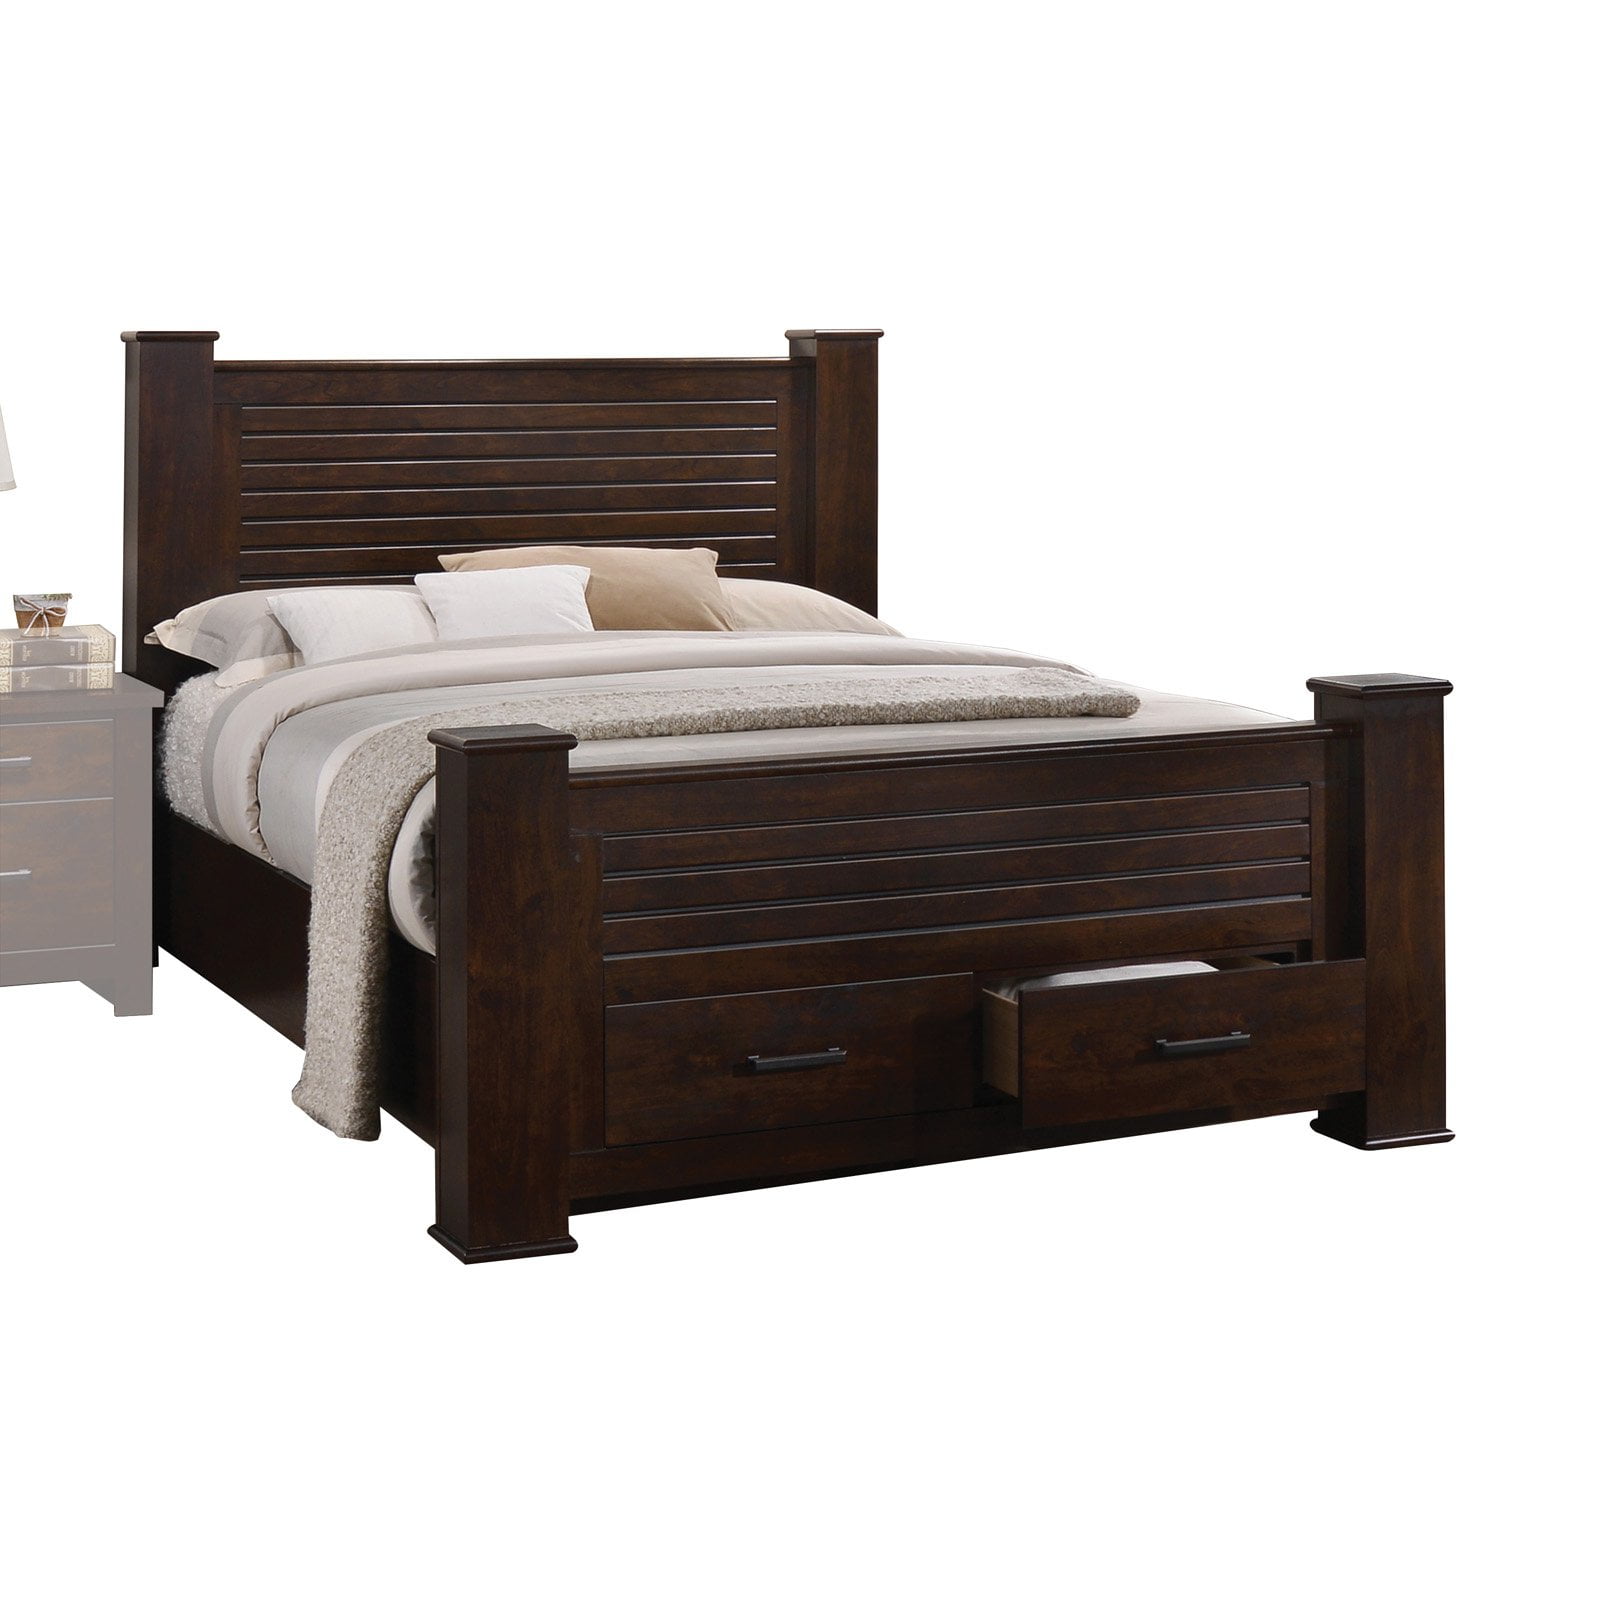 Details about   Apollo Queen Size Bed with Headboard 